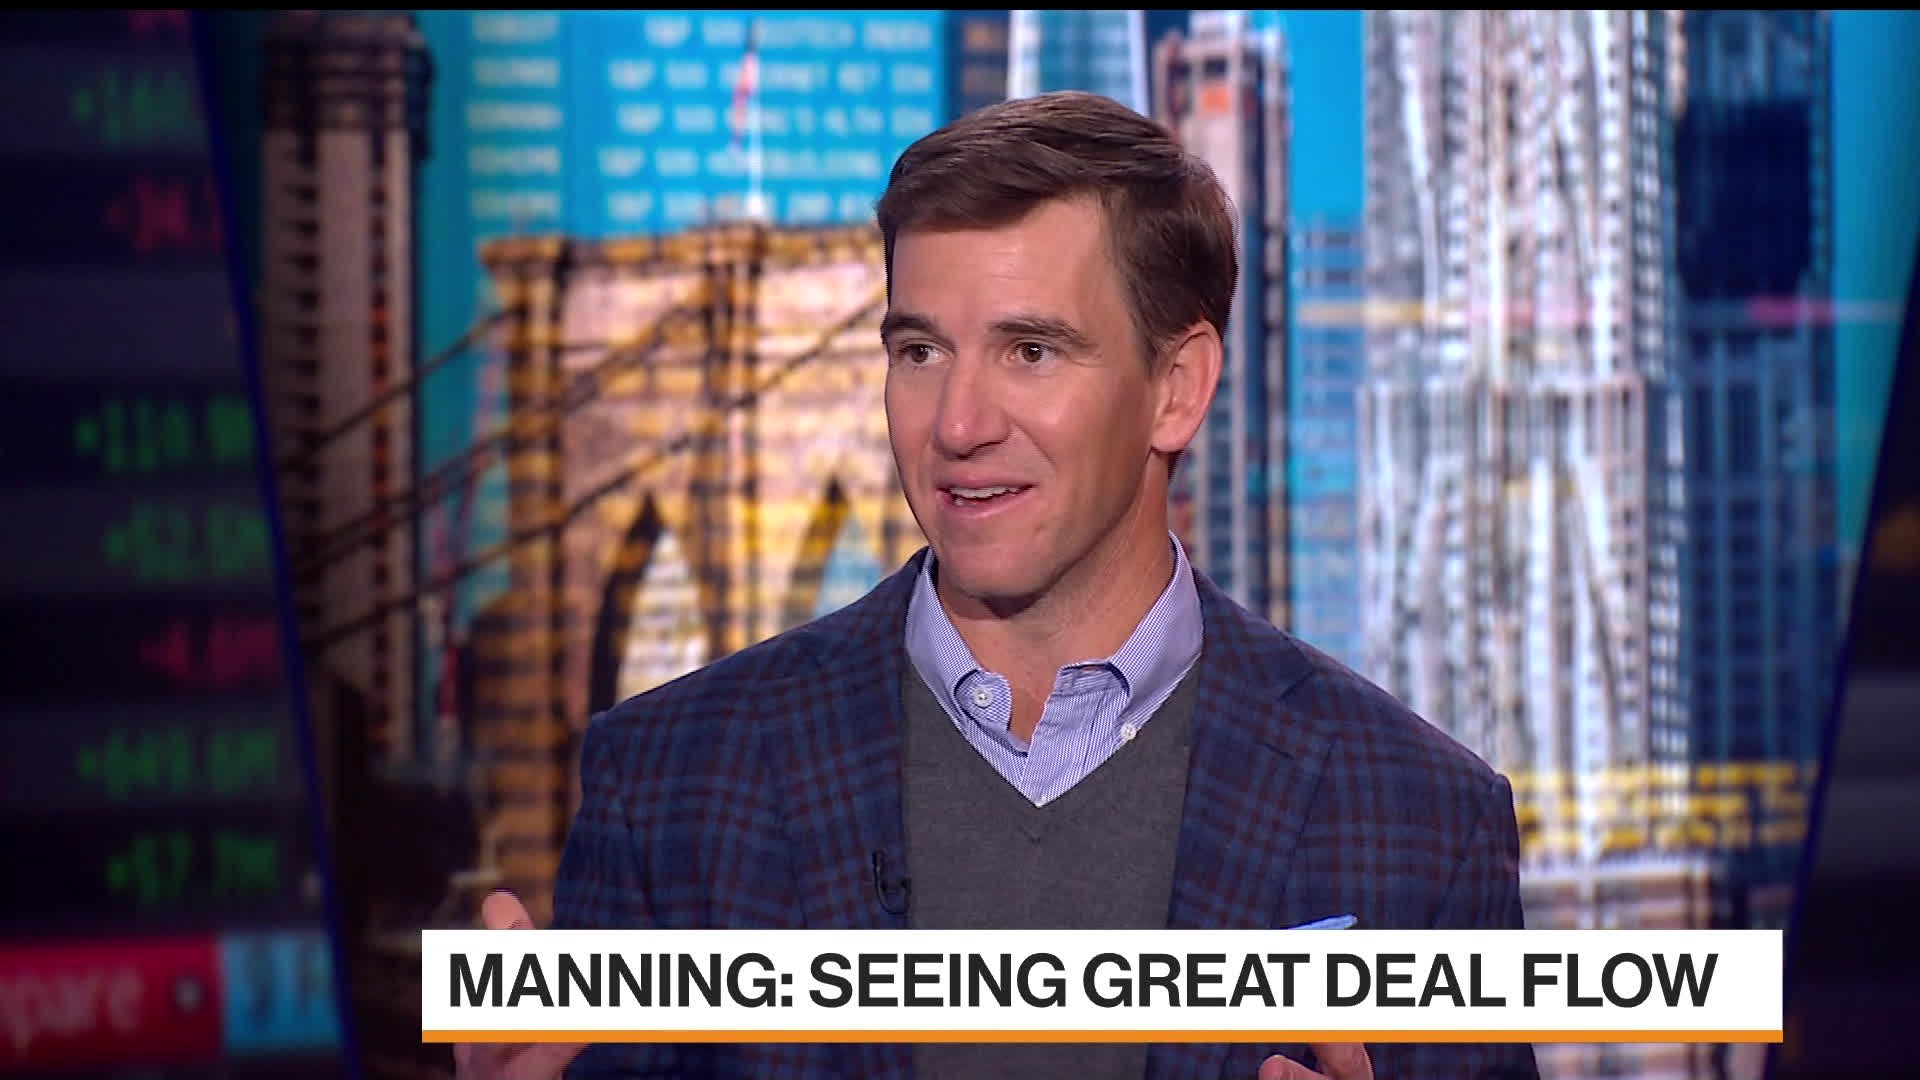 Watch Eli Manning Says There's Great Deal Flow in Private Equity ...